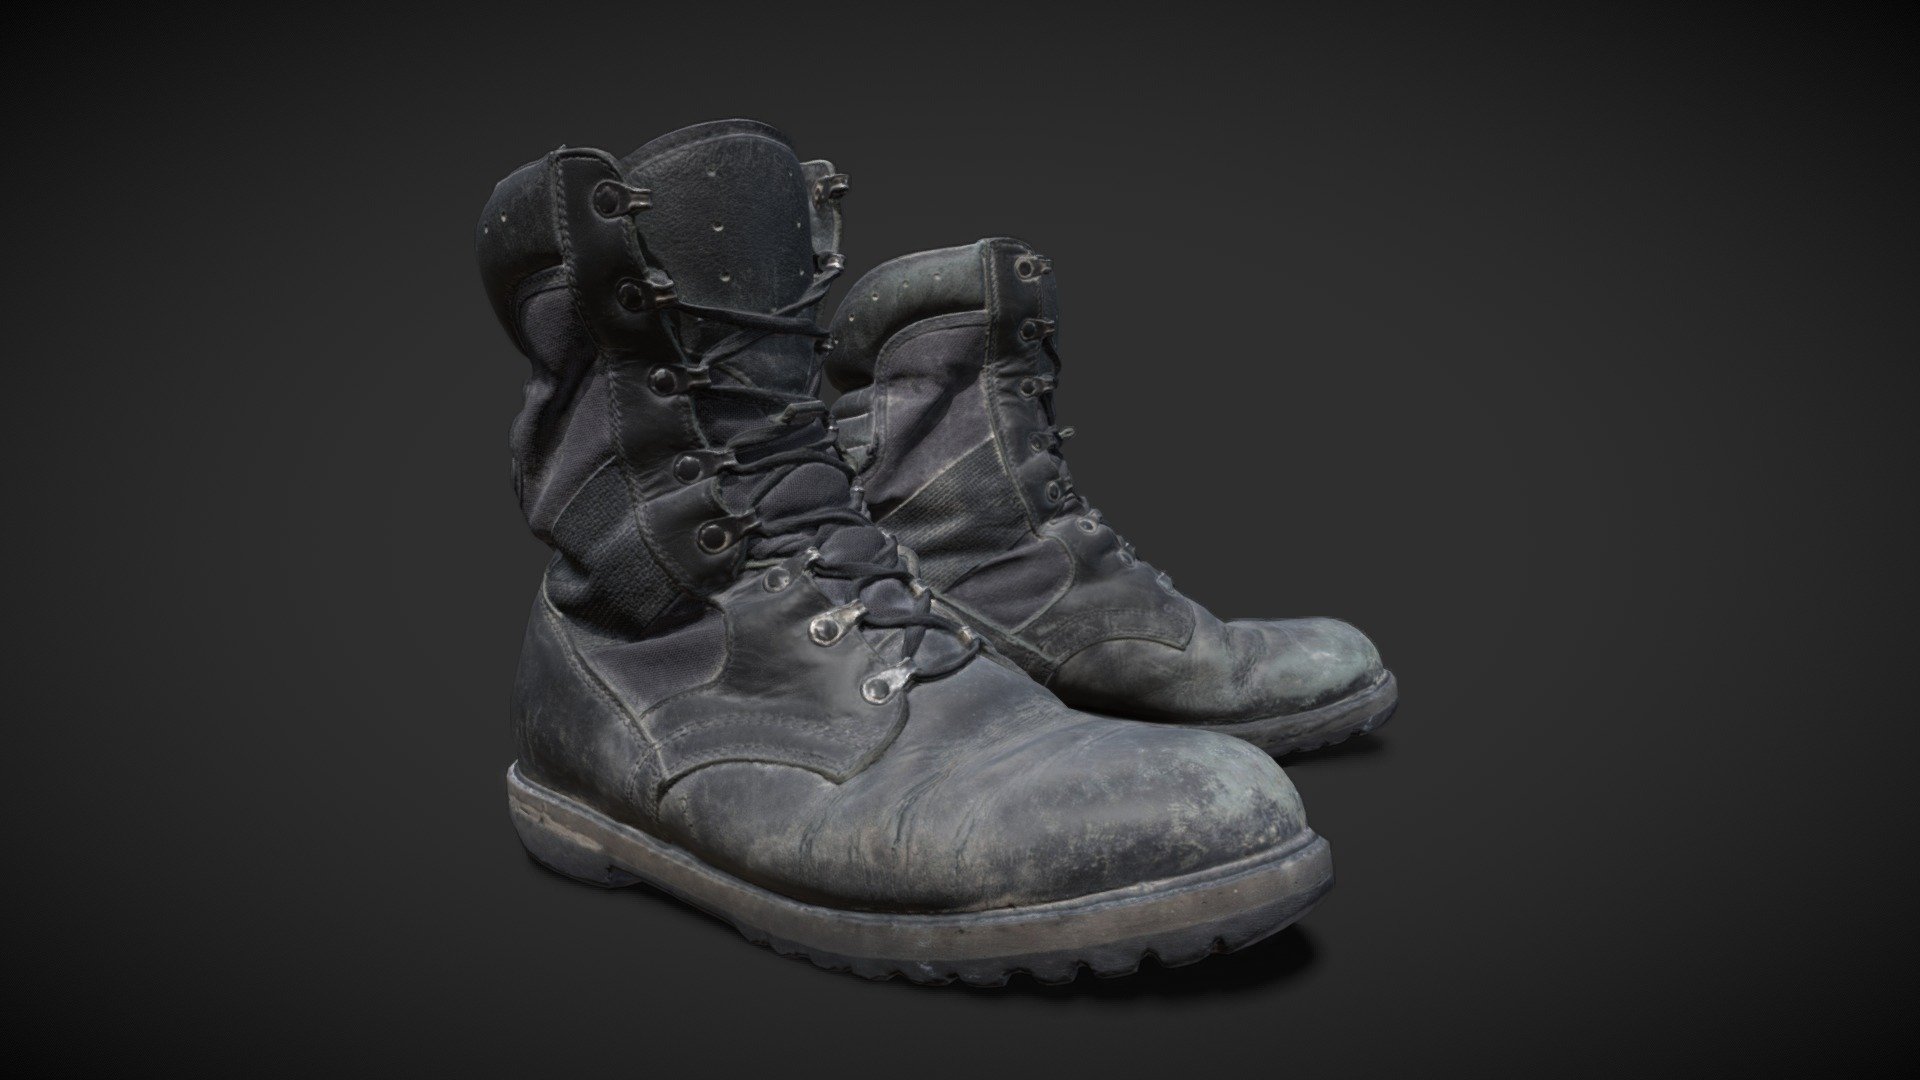 Model created as manual retopology exercise, using polybuild tool in Blender. Original model made using photogrammetry in Agisoft Metashape. Textures baked and made in Substance Painter 3d model